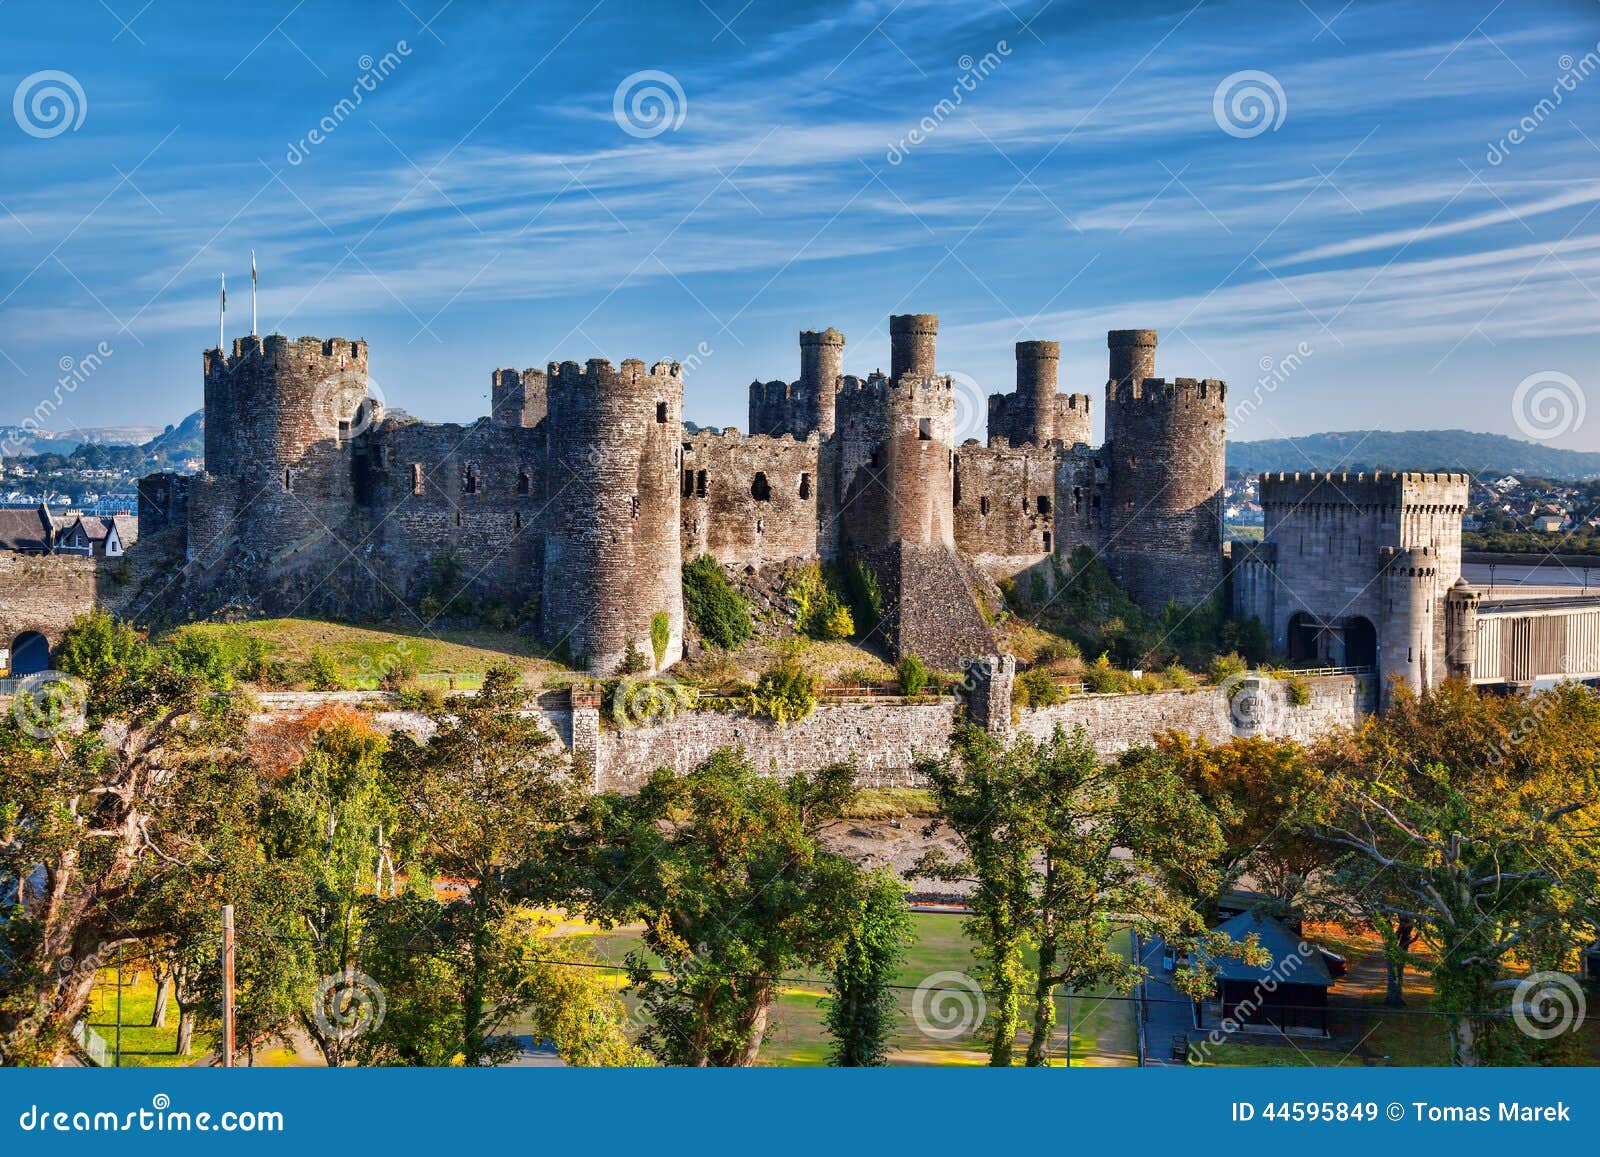 conwy castle in wales, united kingdom, series of walesh castles